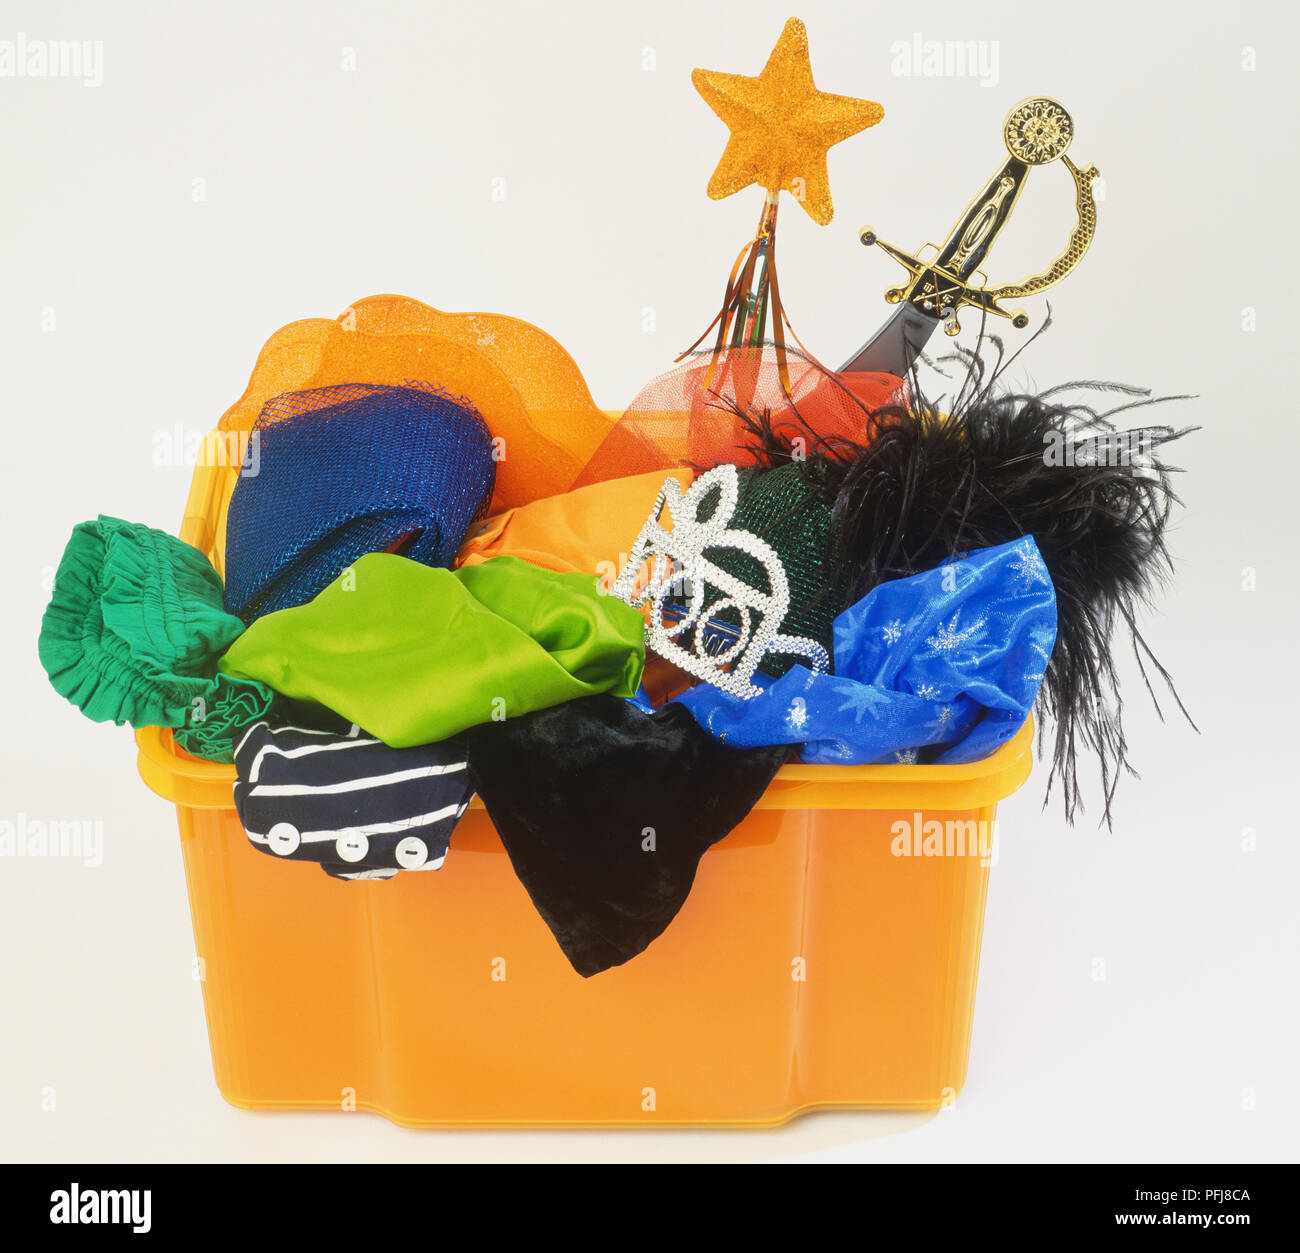 Orange plastic container filled with selection of fancy dress accessories and props, front view. Stock Photo